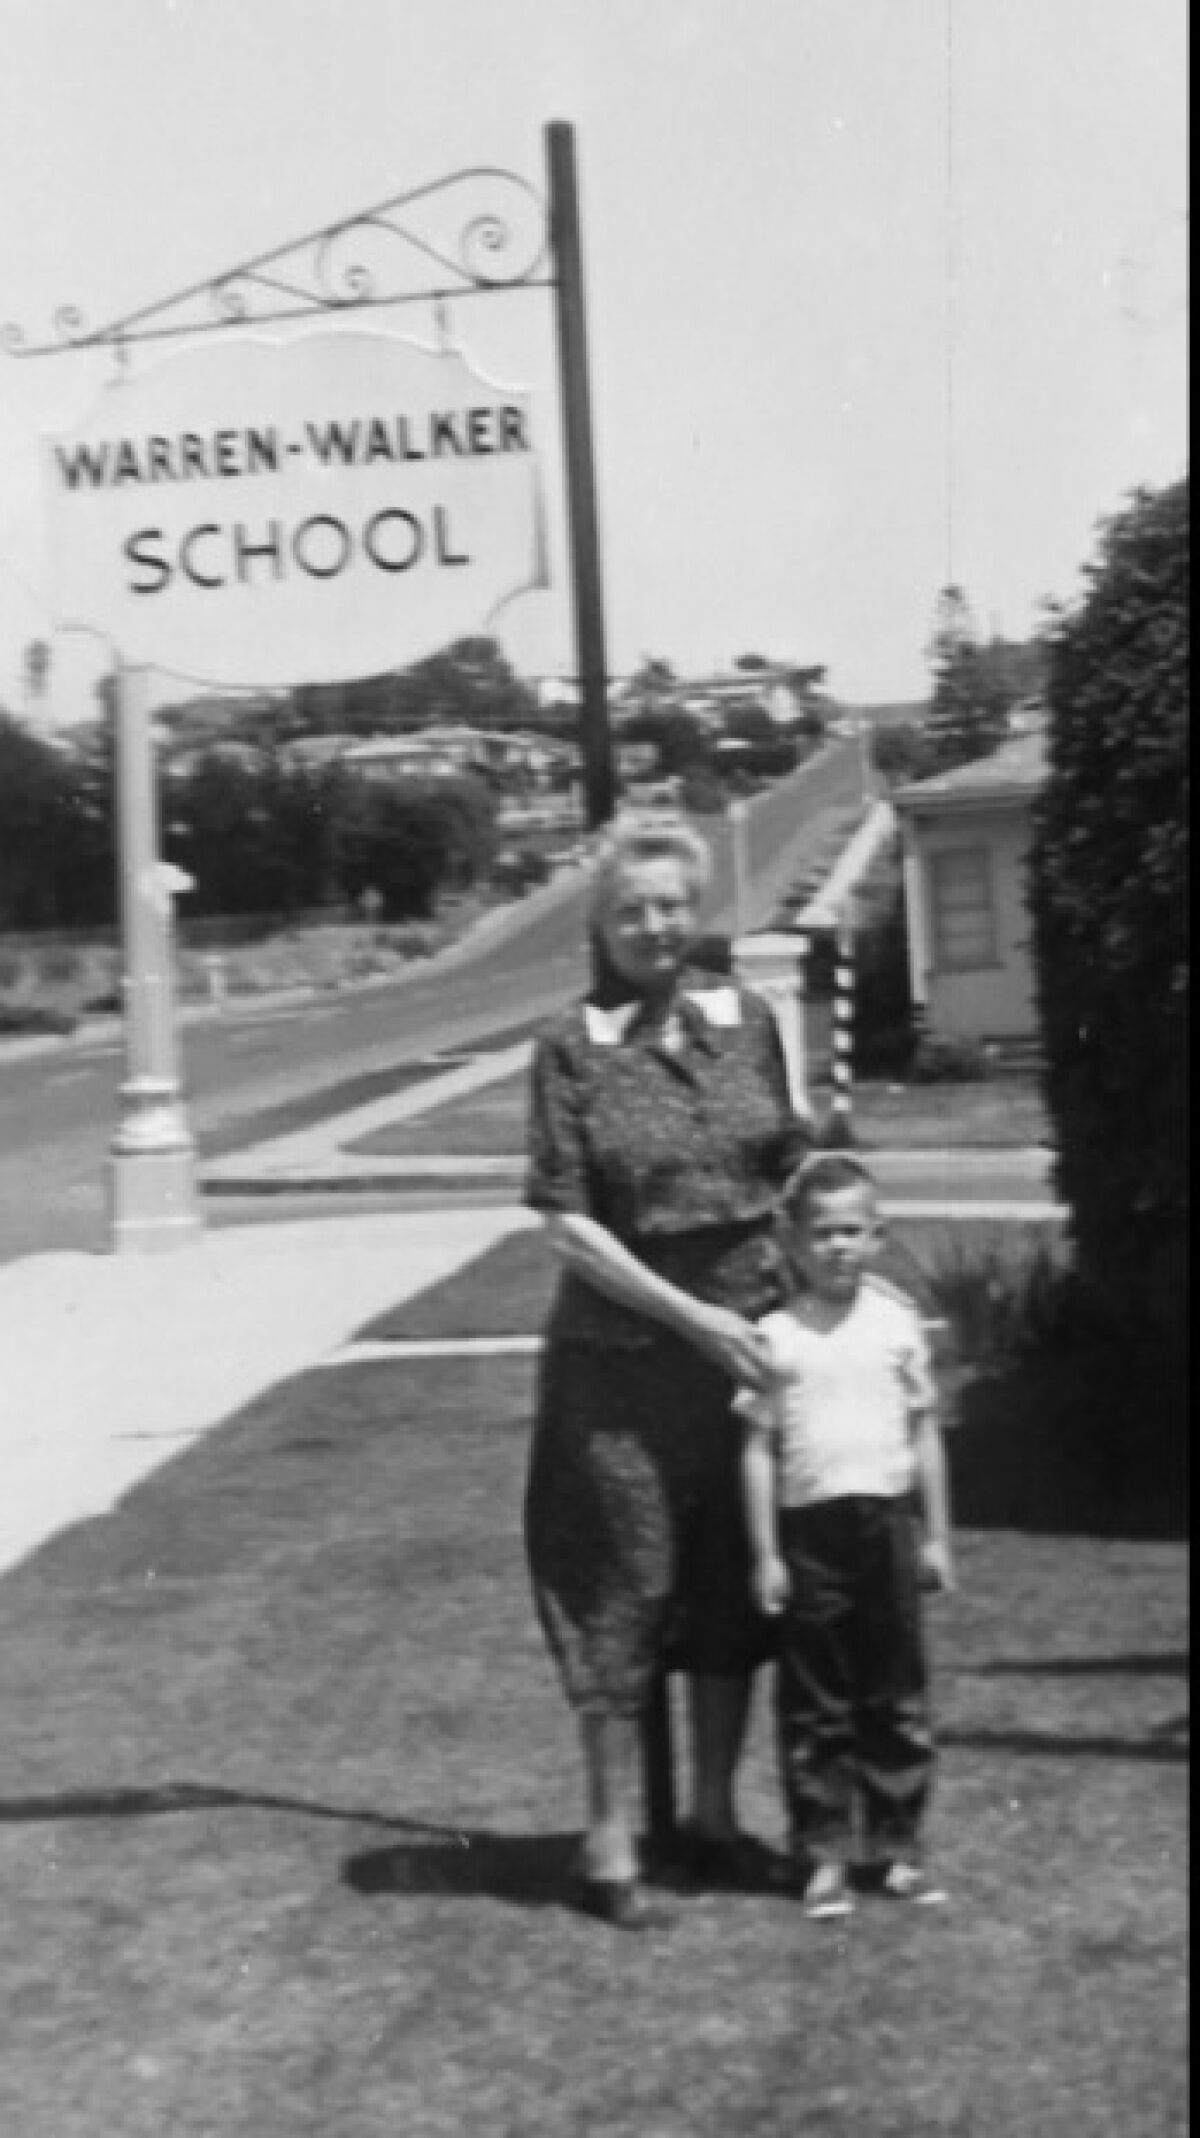 Nellie Warren-Walker poses with one of her students beneath the Warren-Walker School sign at 4605 Point Loma Ave.